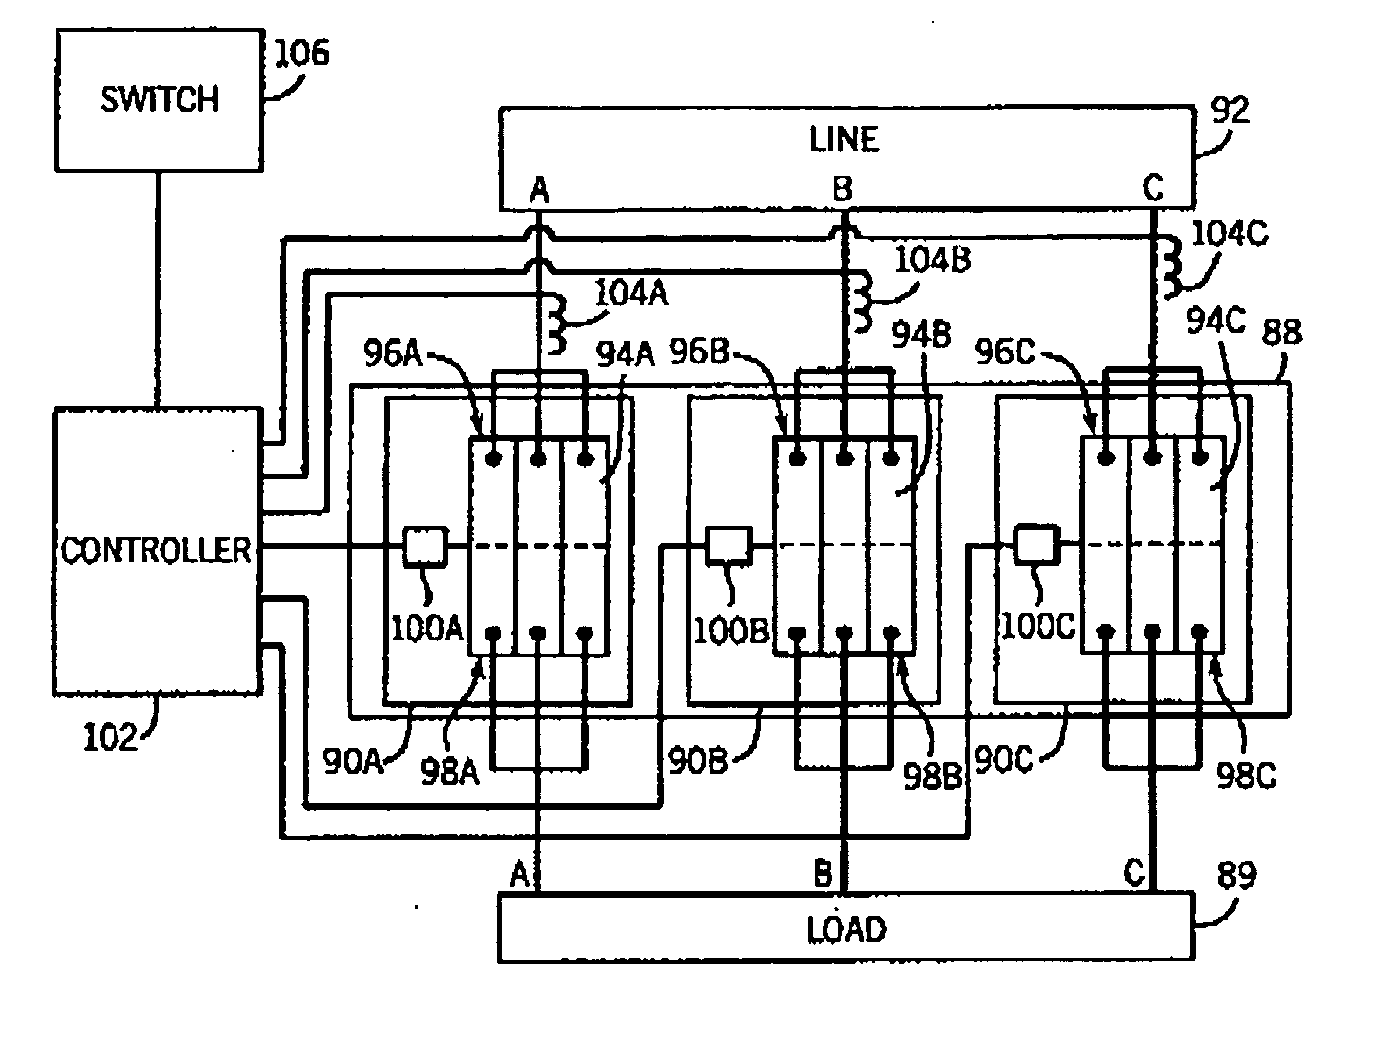 Modular contactor assembly having independently controllable contactors